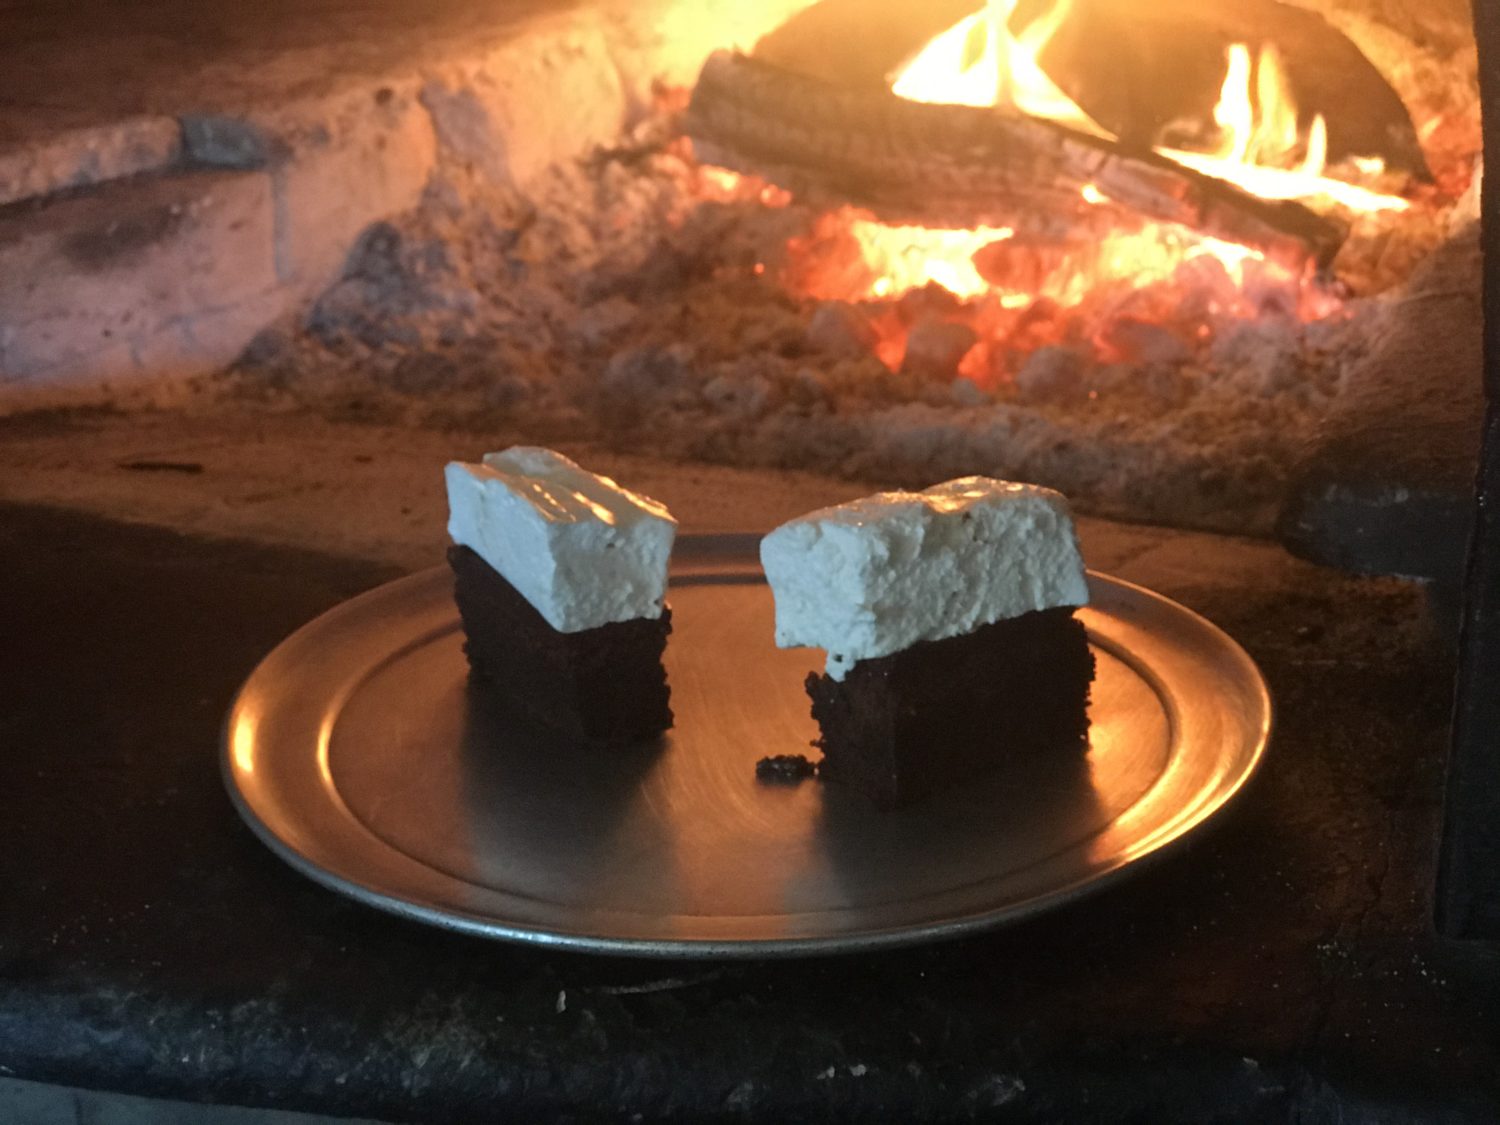 los alamosmarshmallow topped brownie at full of life flatbreadmichele stueven 672181